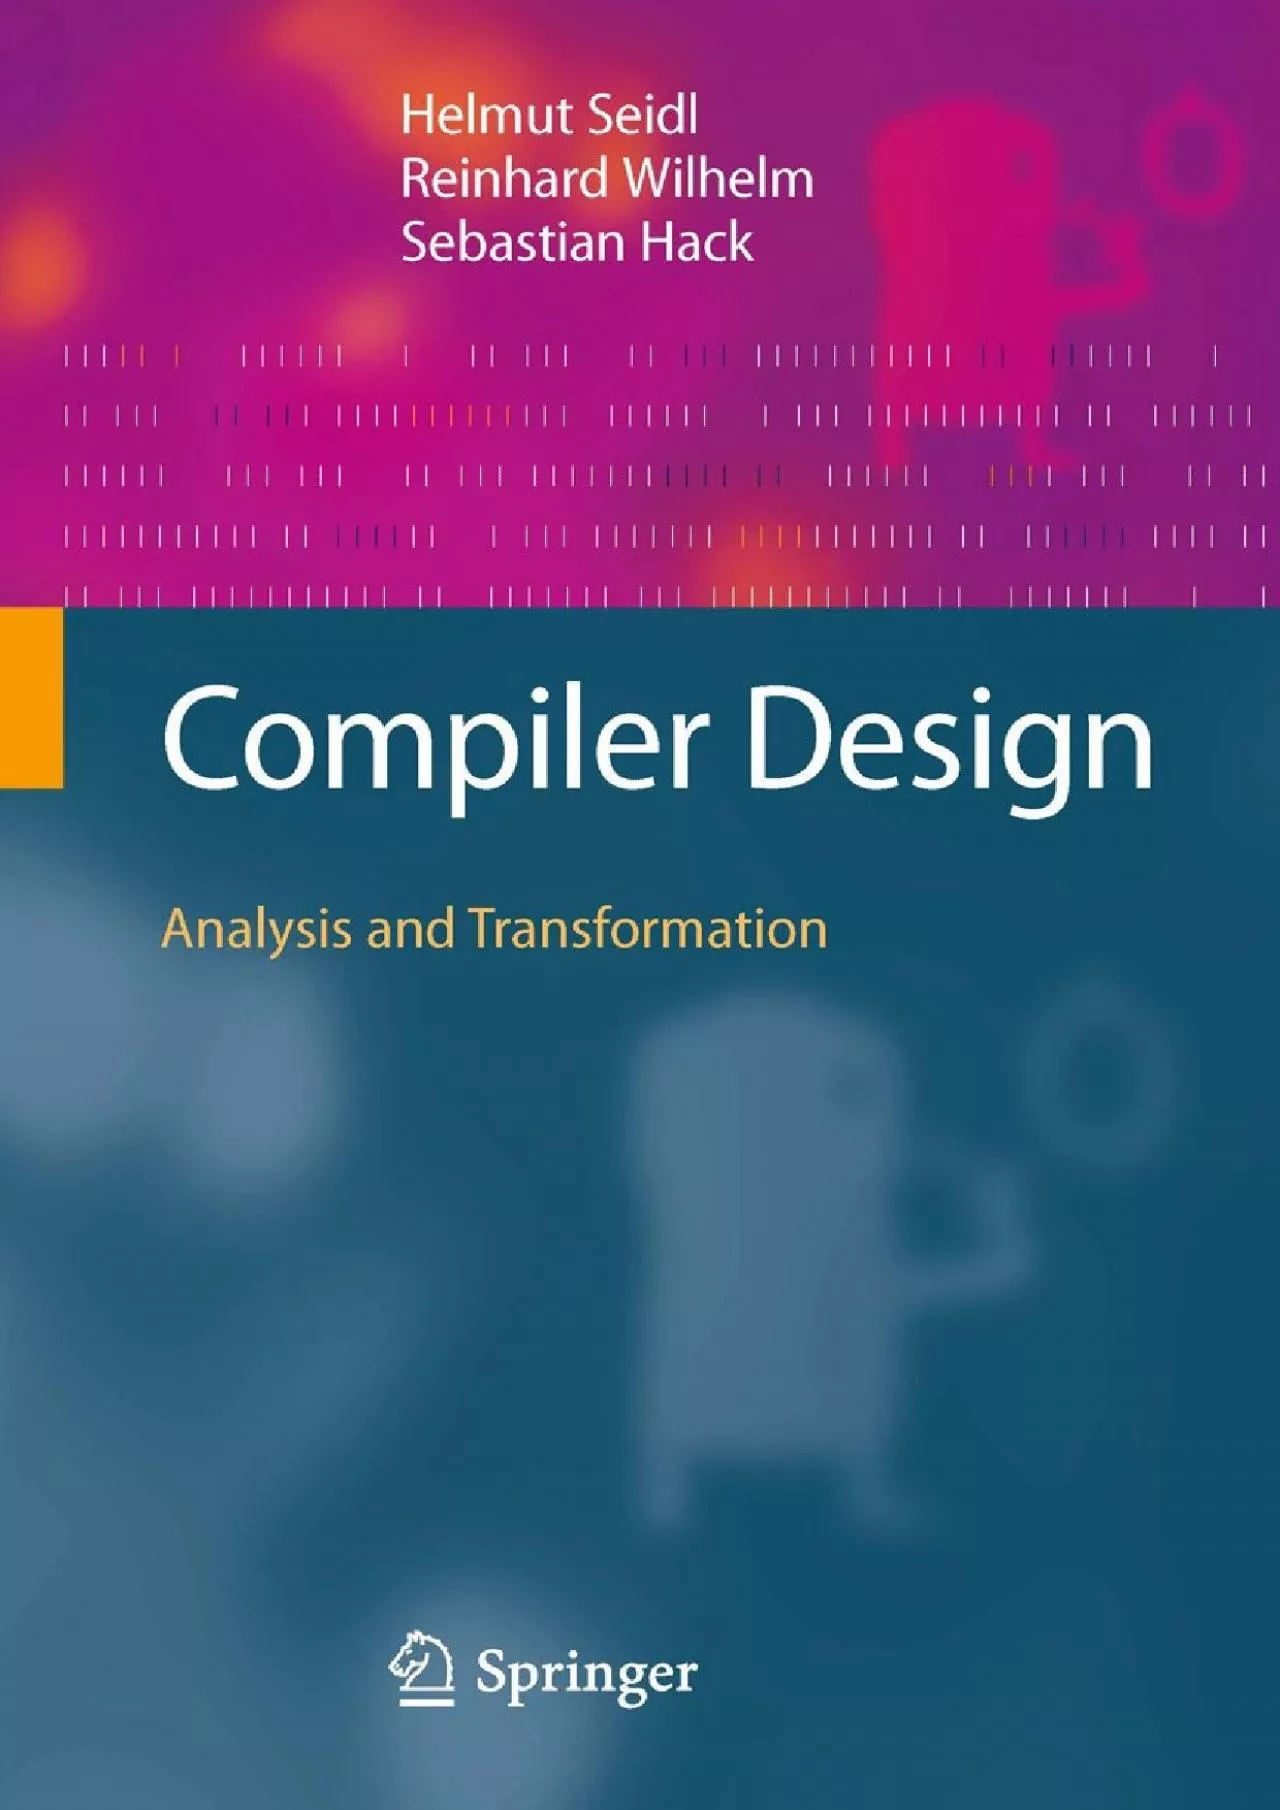 [READ]-Compiler Design: Analysis and Transformation